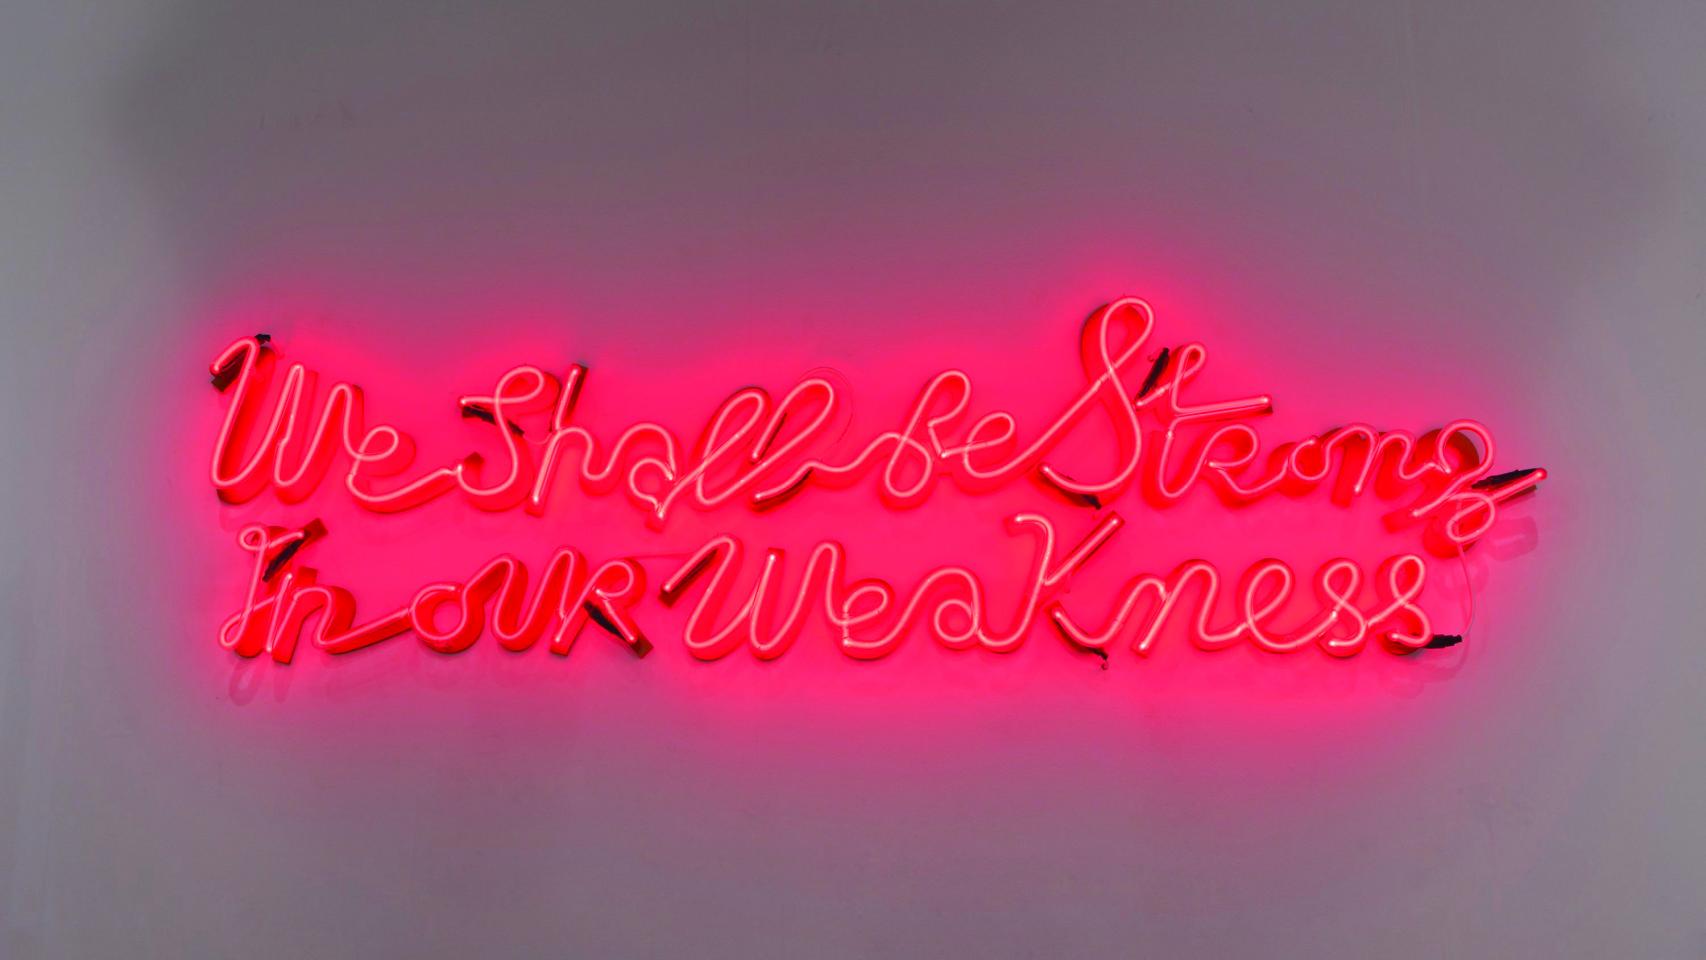 Yael Bartana: 'We Shall be Strong...', 2012 (Annet Gelink)